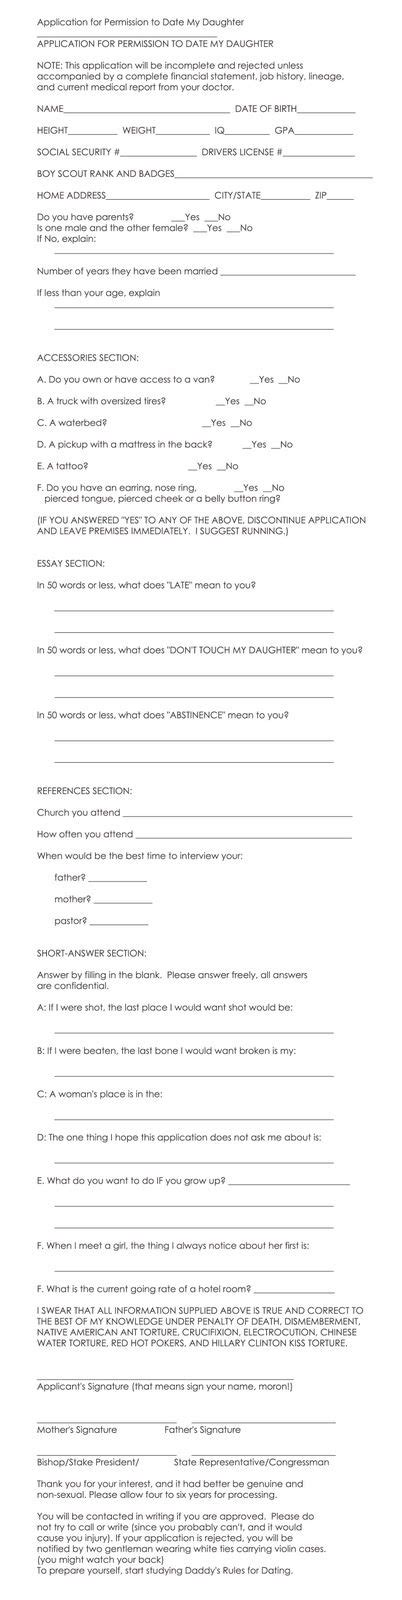 16 Best Date My Daughter Applications Images On Pinterest